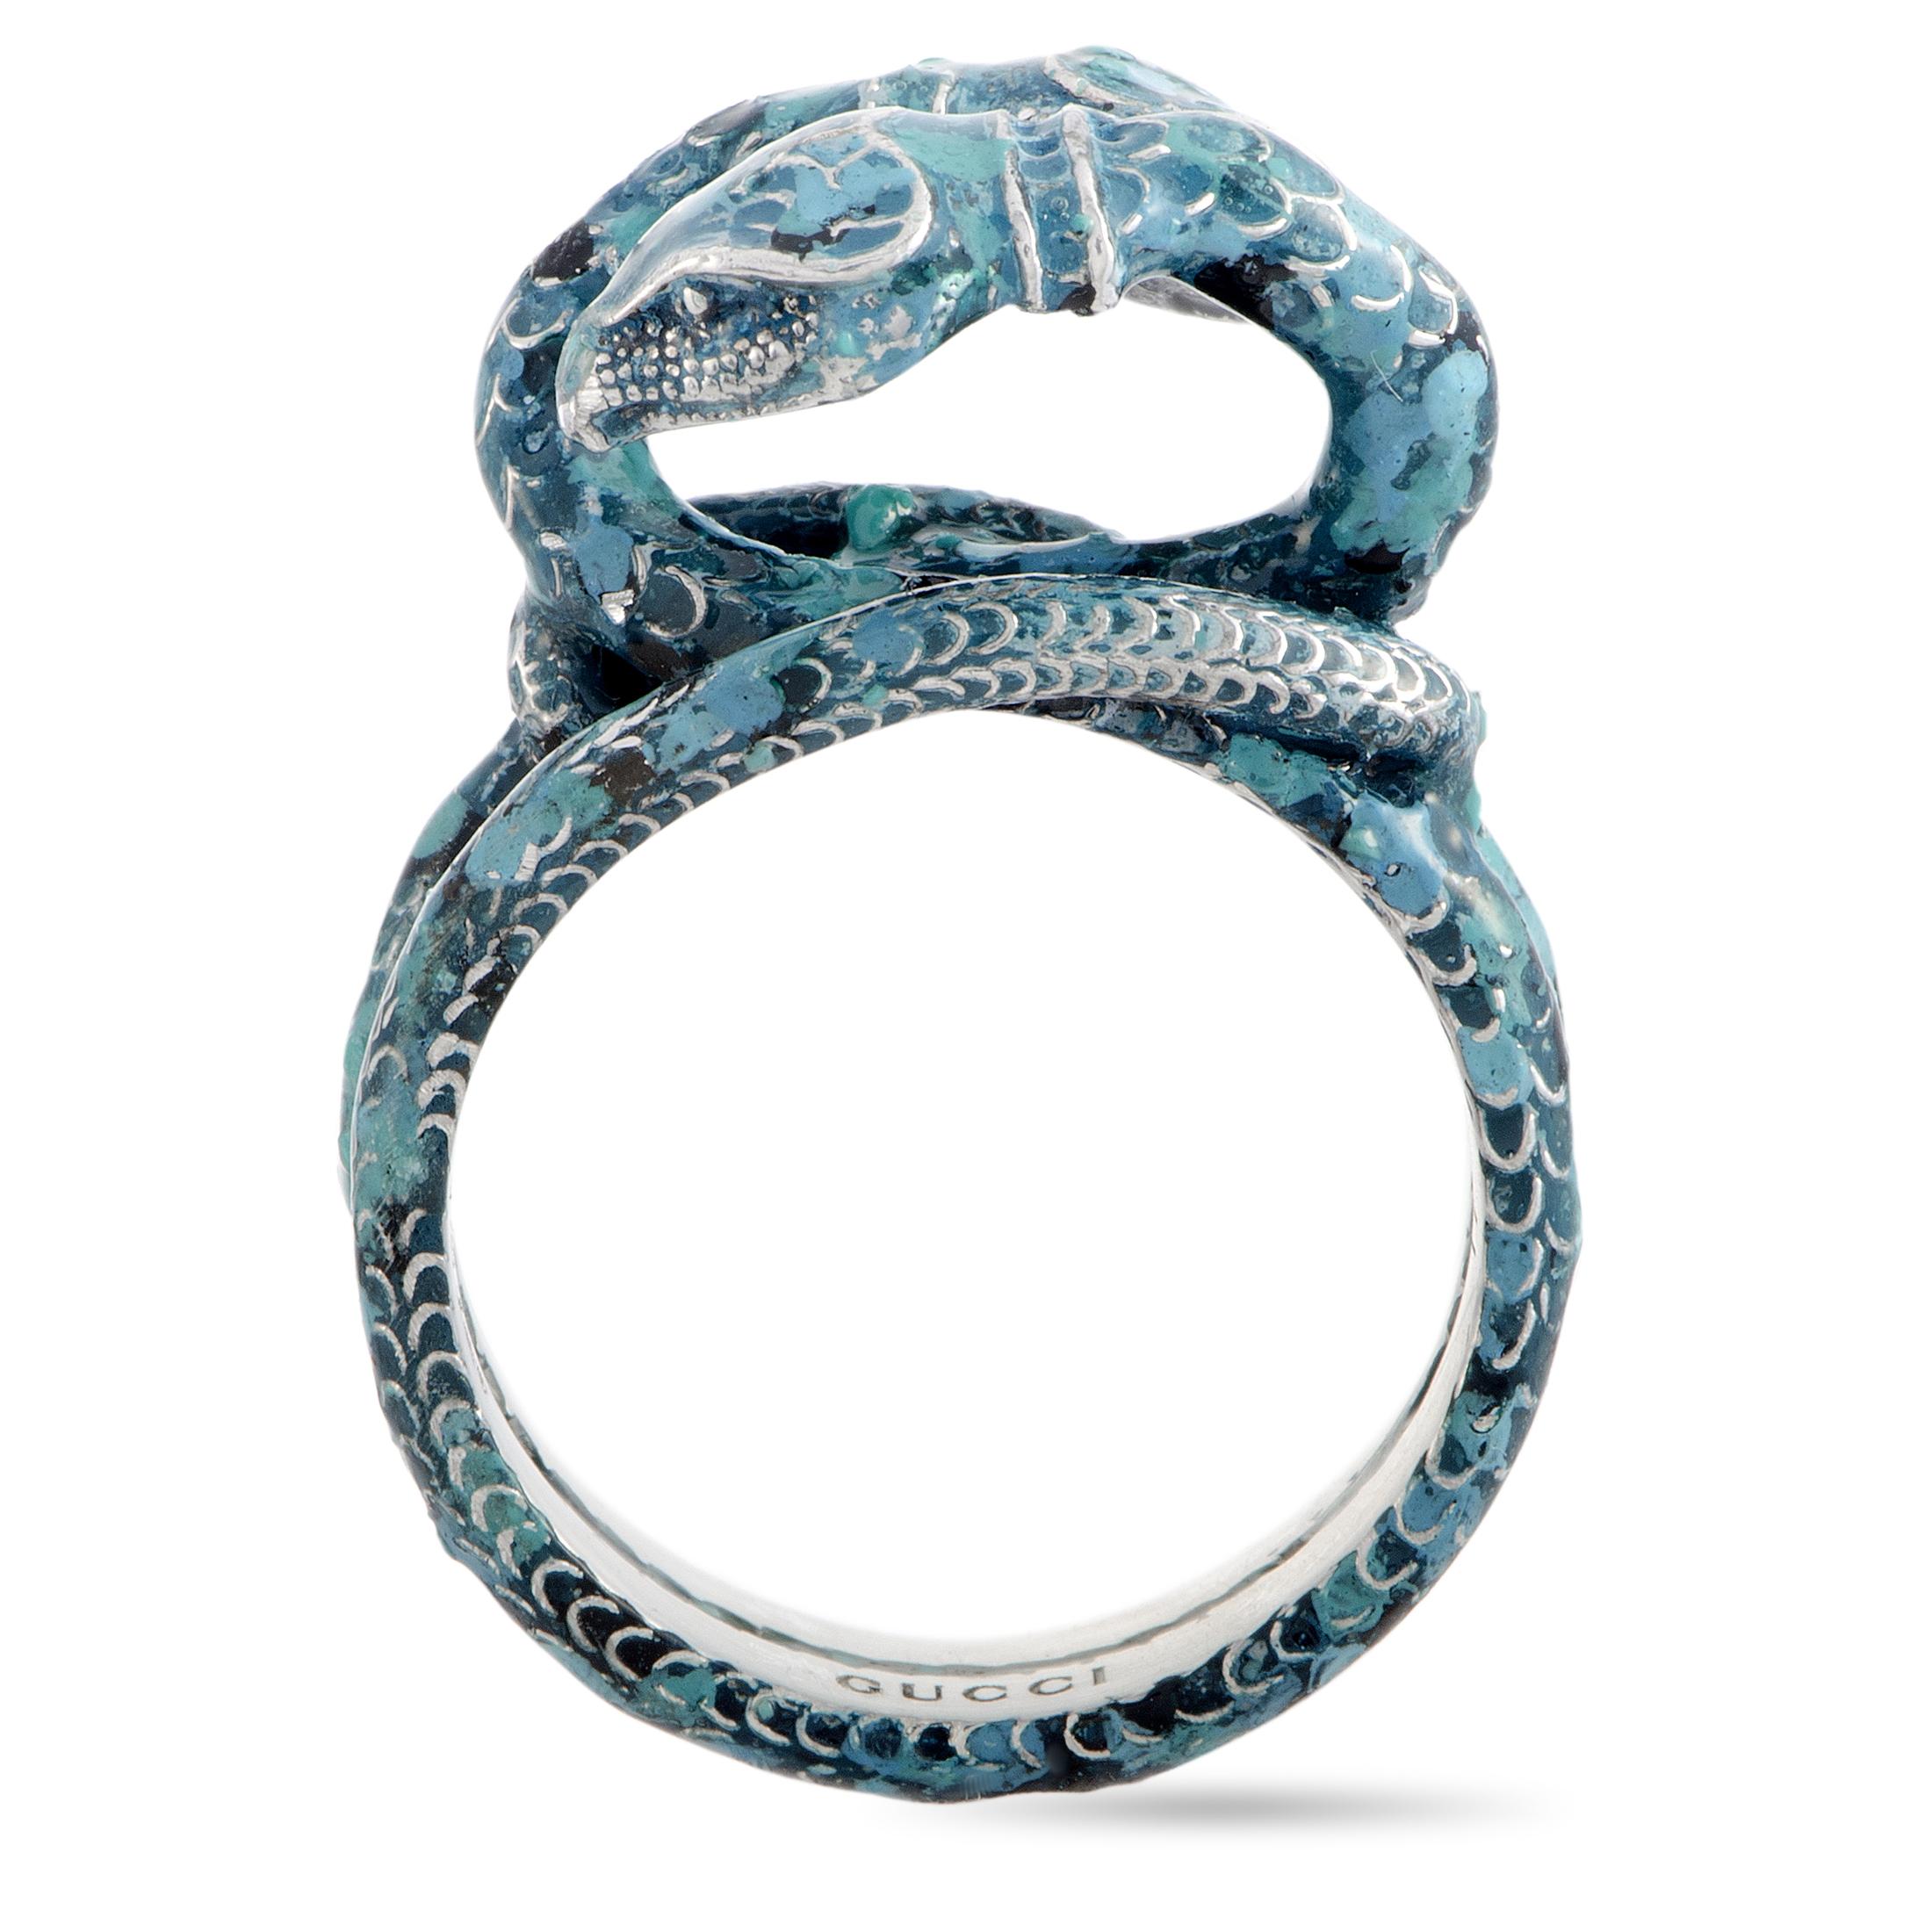 The Gucci “Garden” ring is made out of silver and blue enamel and weighs 9.9 grams. The ring boasts band thickness of 6 mm and top height of 10 mm, while top dimensions measure 15 by 17 mm.
 
 This jewelry piece is offered in brand new condition and